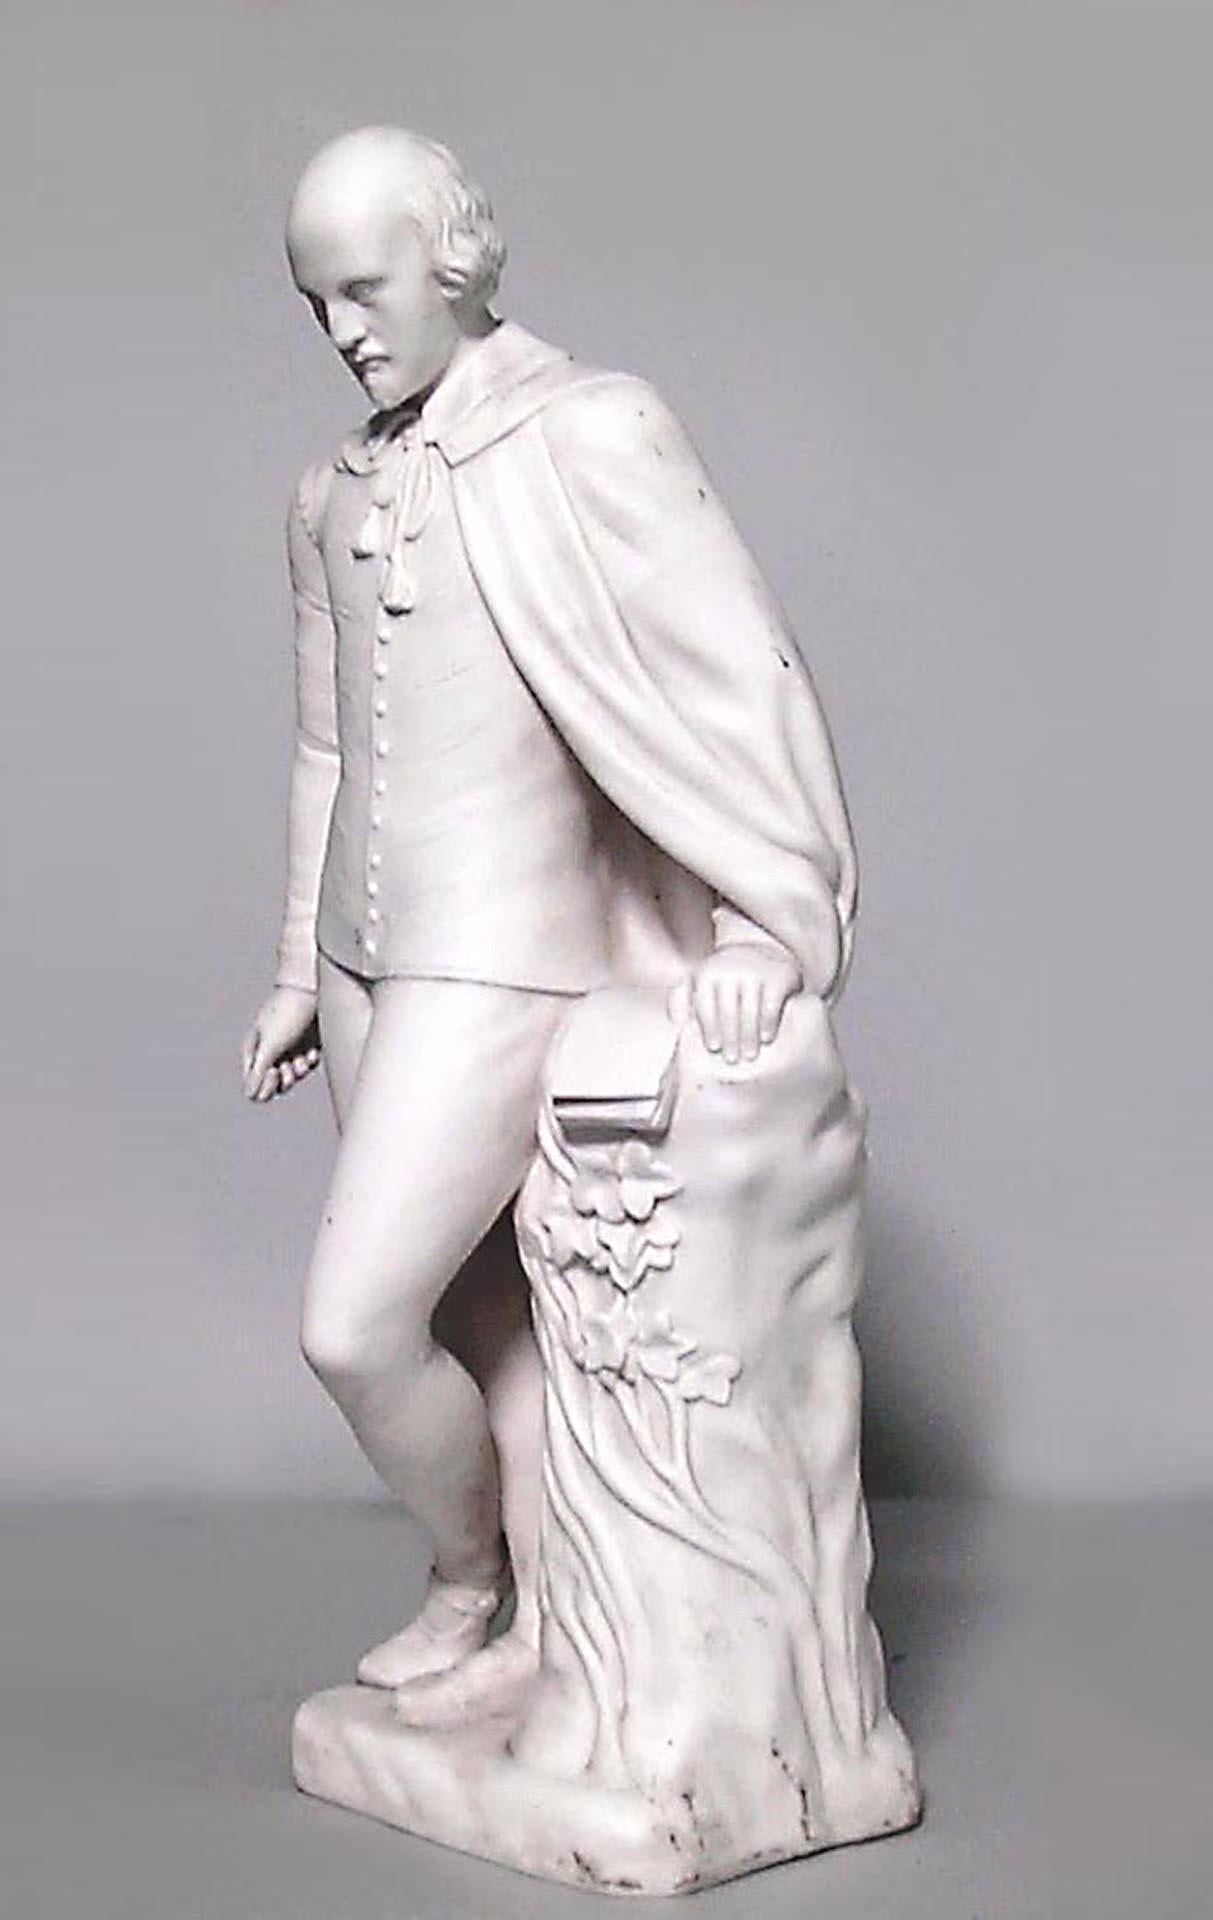 English Victorian white parian porcelain figure of William Shakespeare standing by tree stump (signed JOHN BELL)
